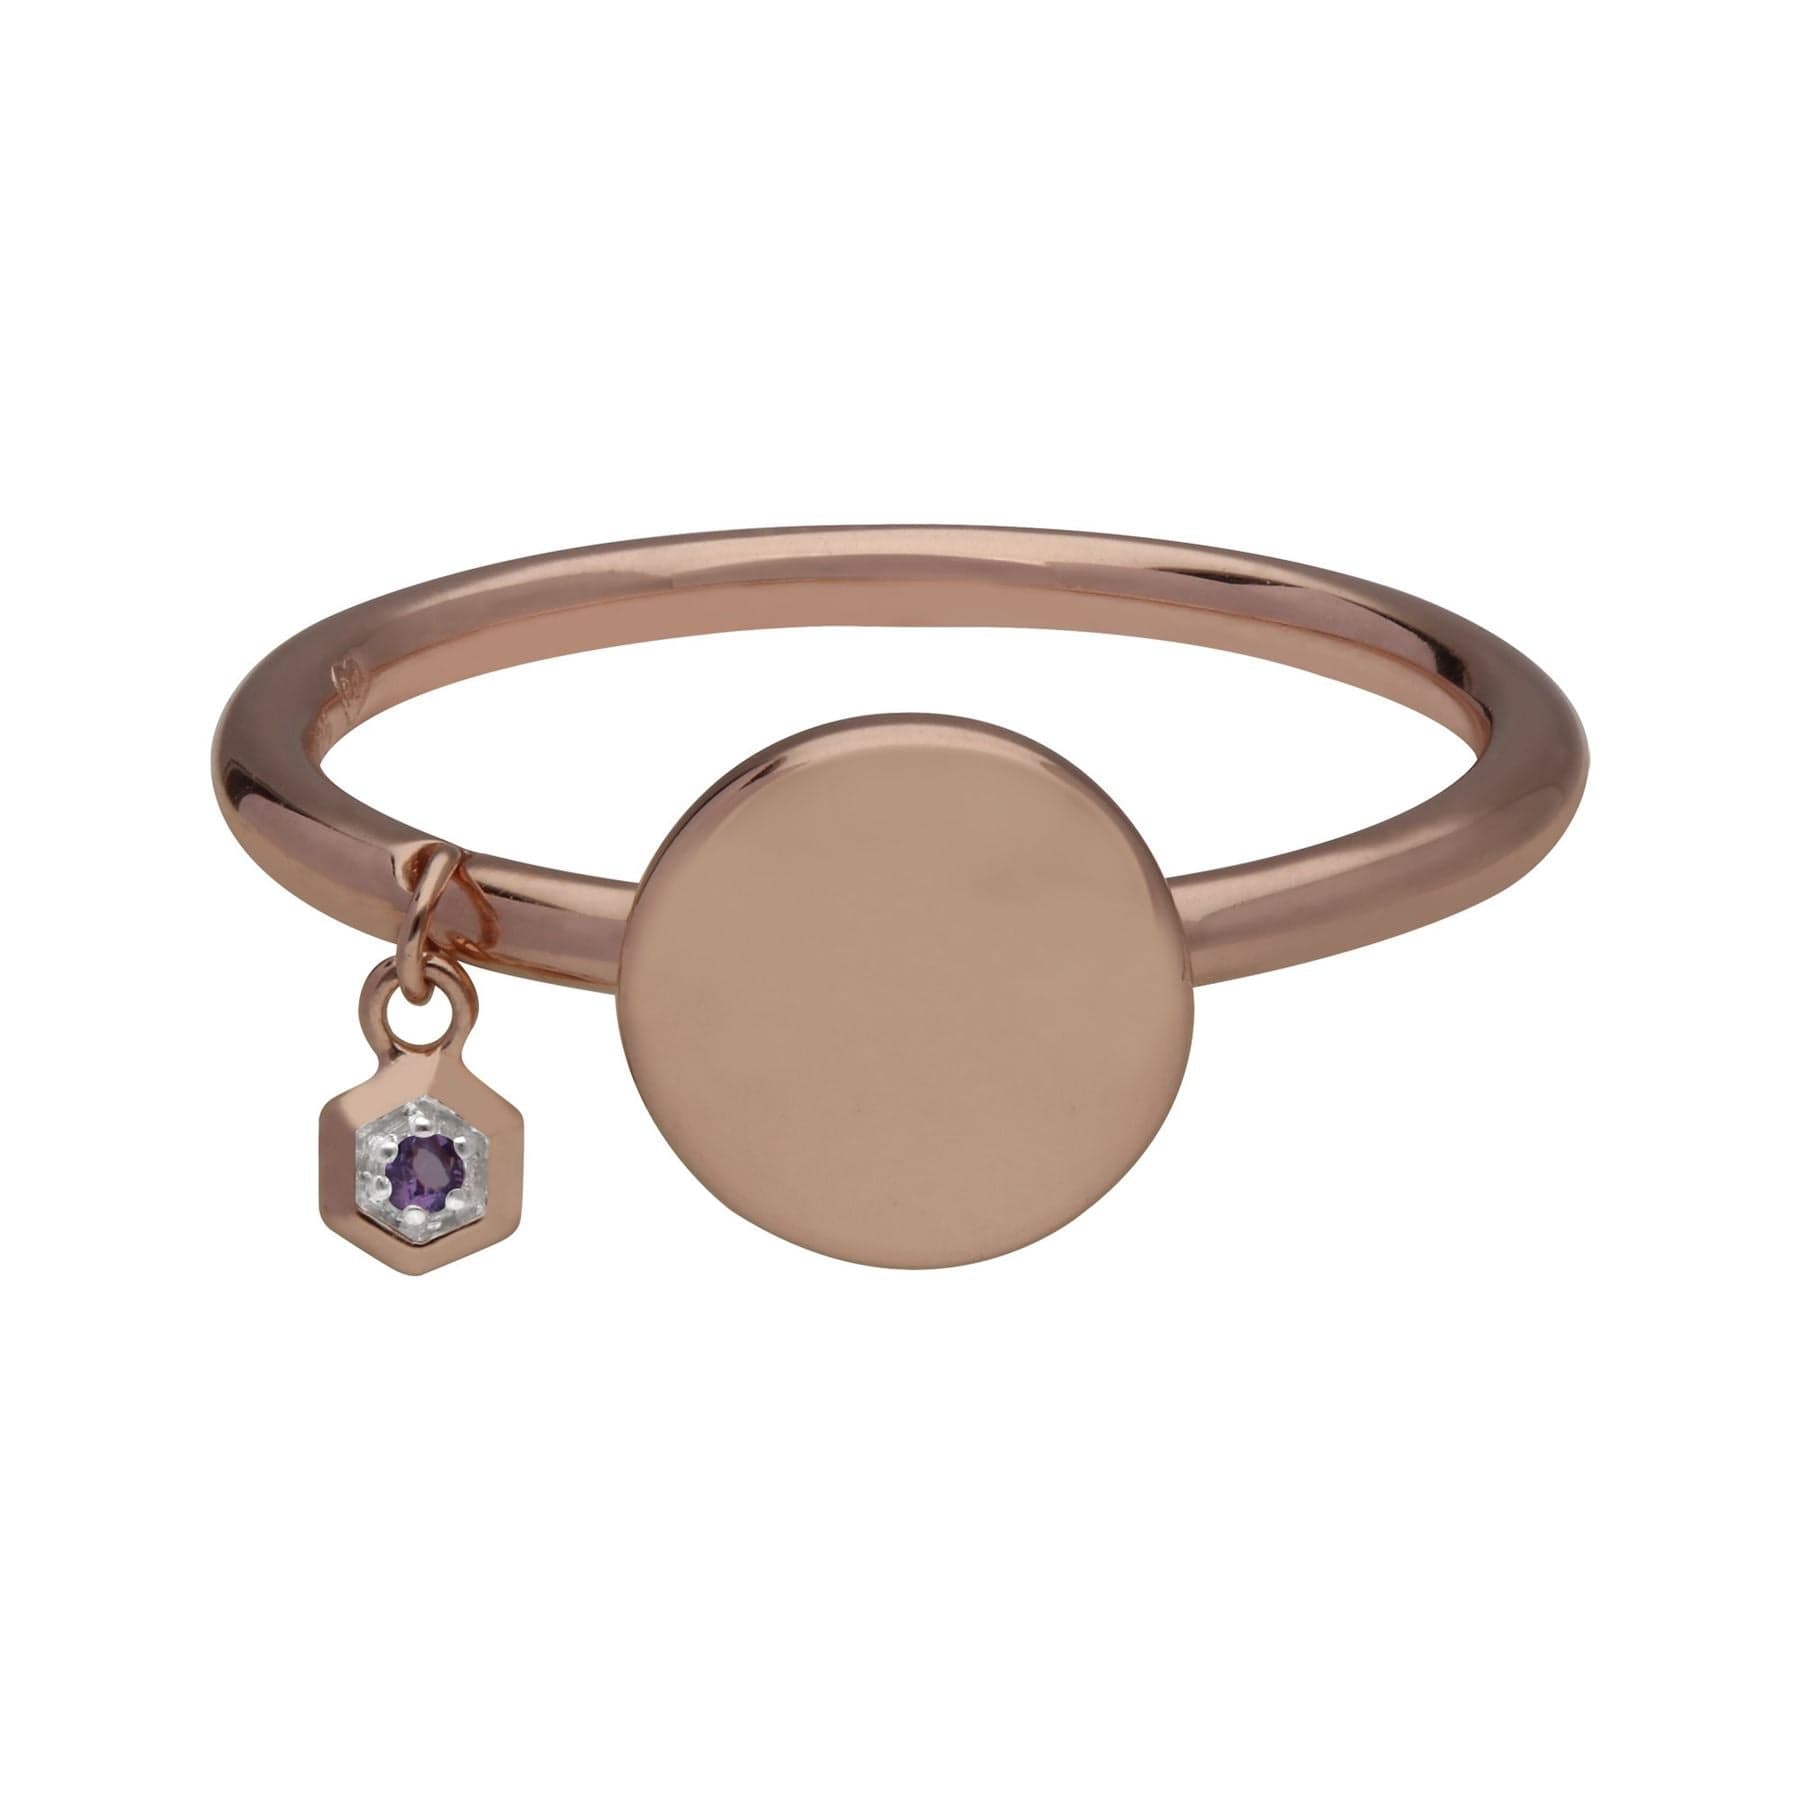 Amethyst Engravable Ring in Rose Gold Plated Sterling Silver - Gemondo